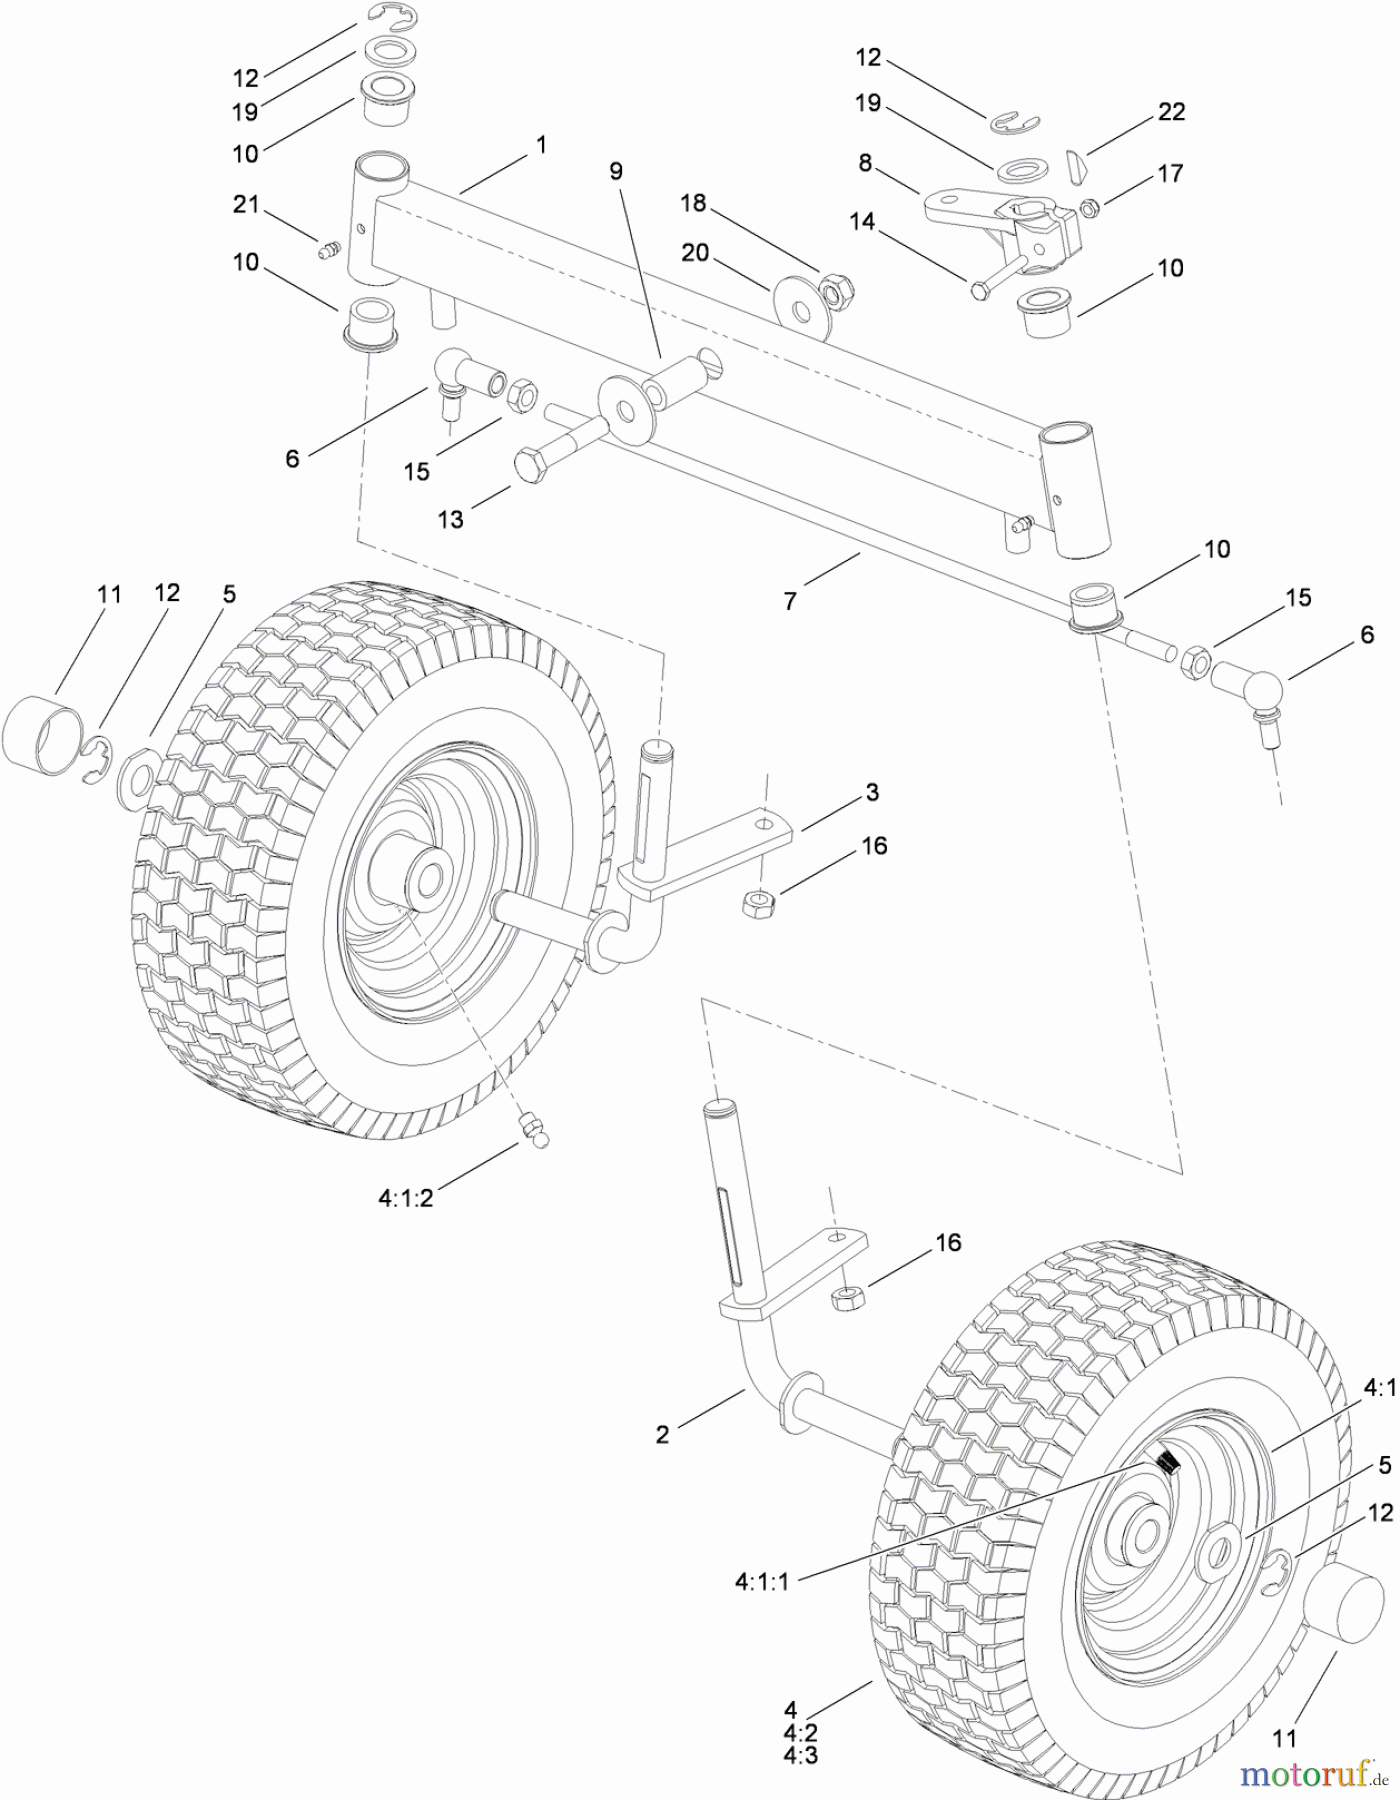  Toro Neu Mowers, Lawn & Garden Tractor Seite 1 74560 (DH 140) - Toro DH 140 Lawn Tractor, 2010 (310000001-310999999) FRONT AXLE AND WHEEL ASSEMBLY